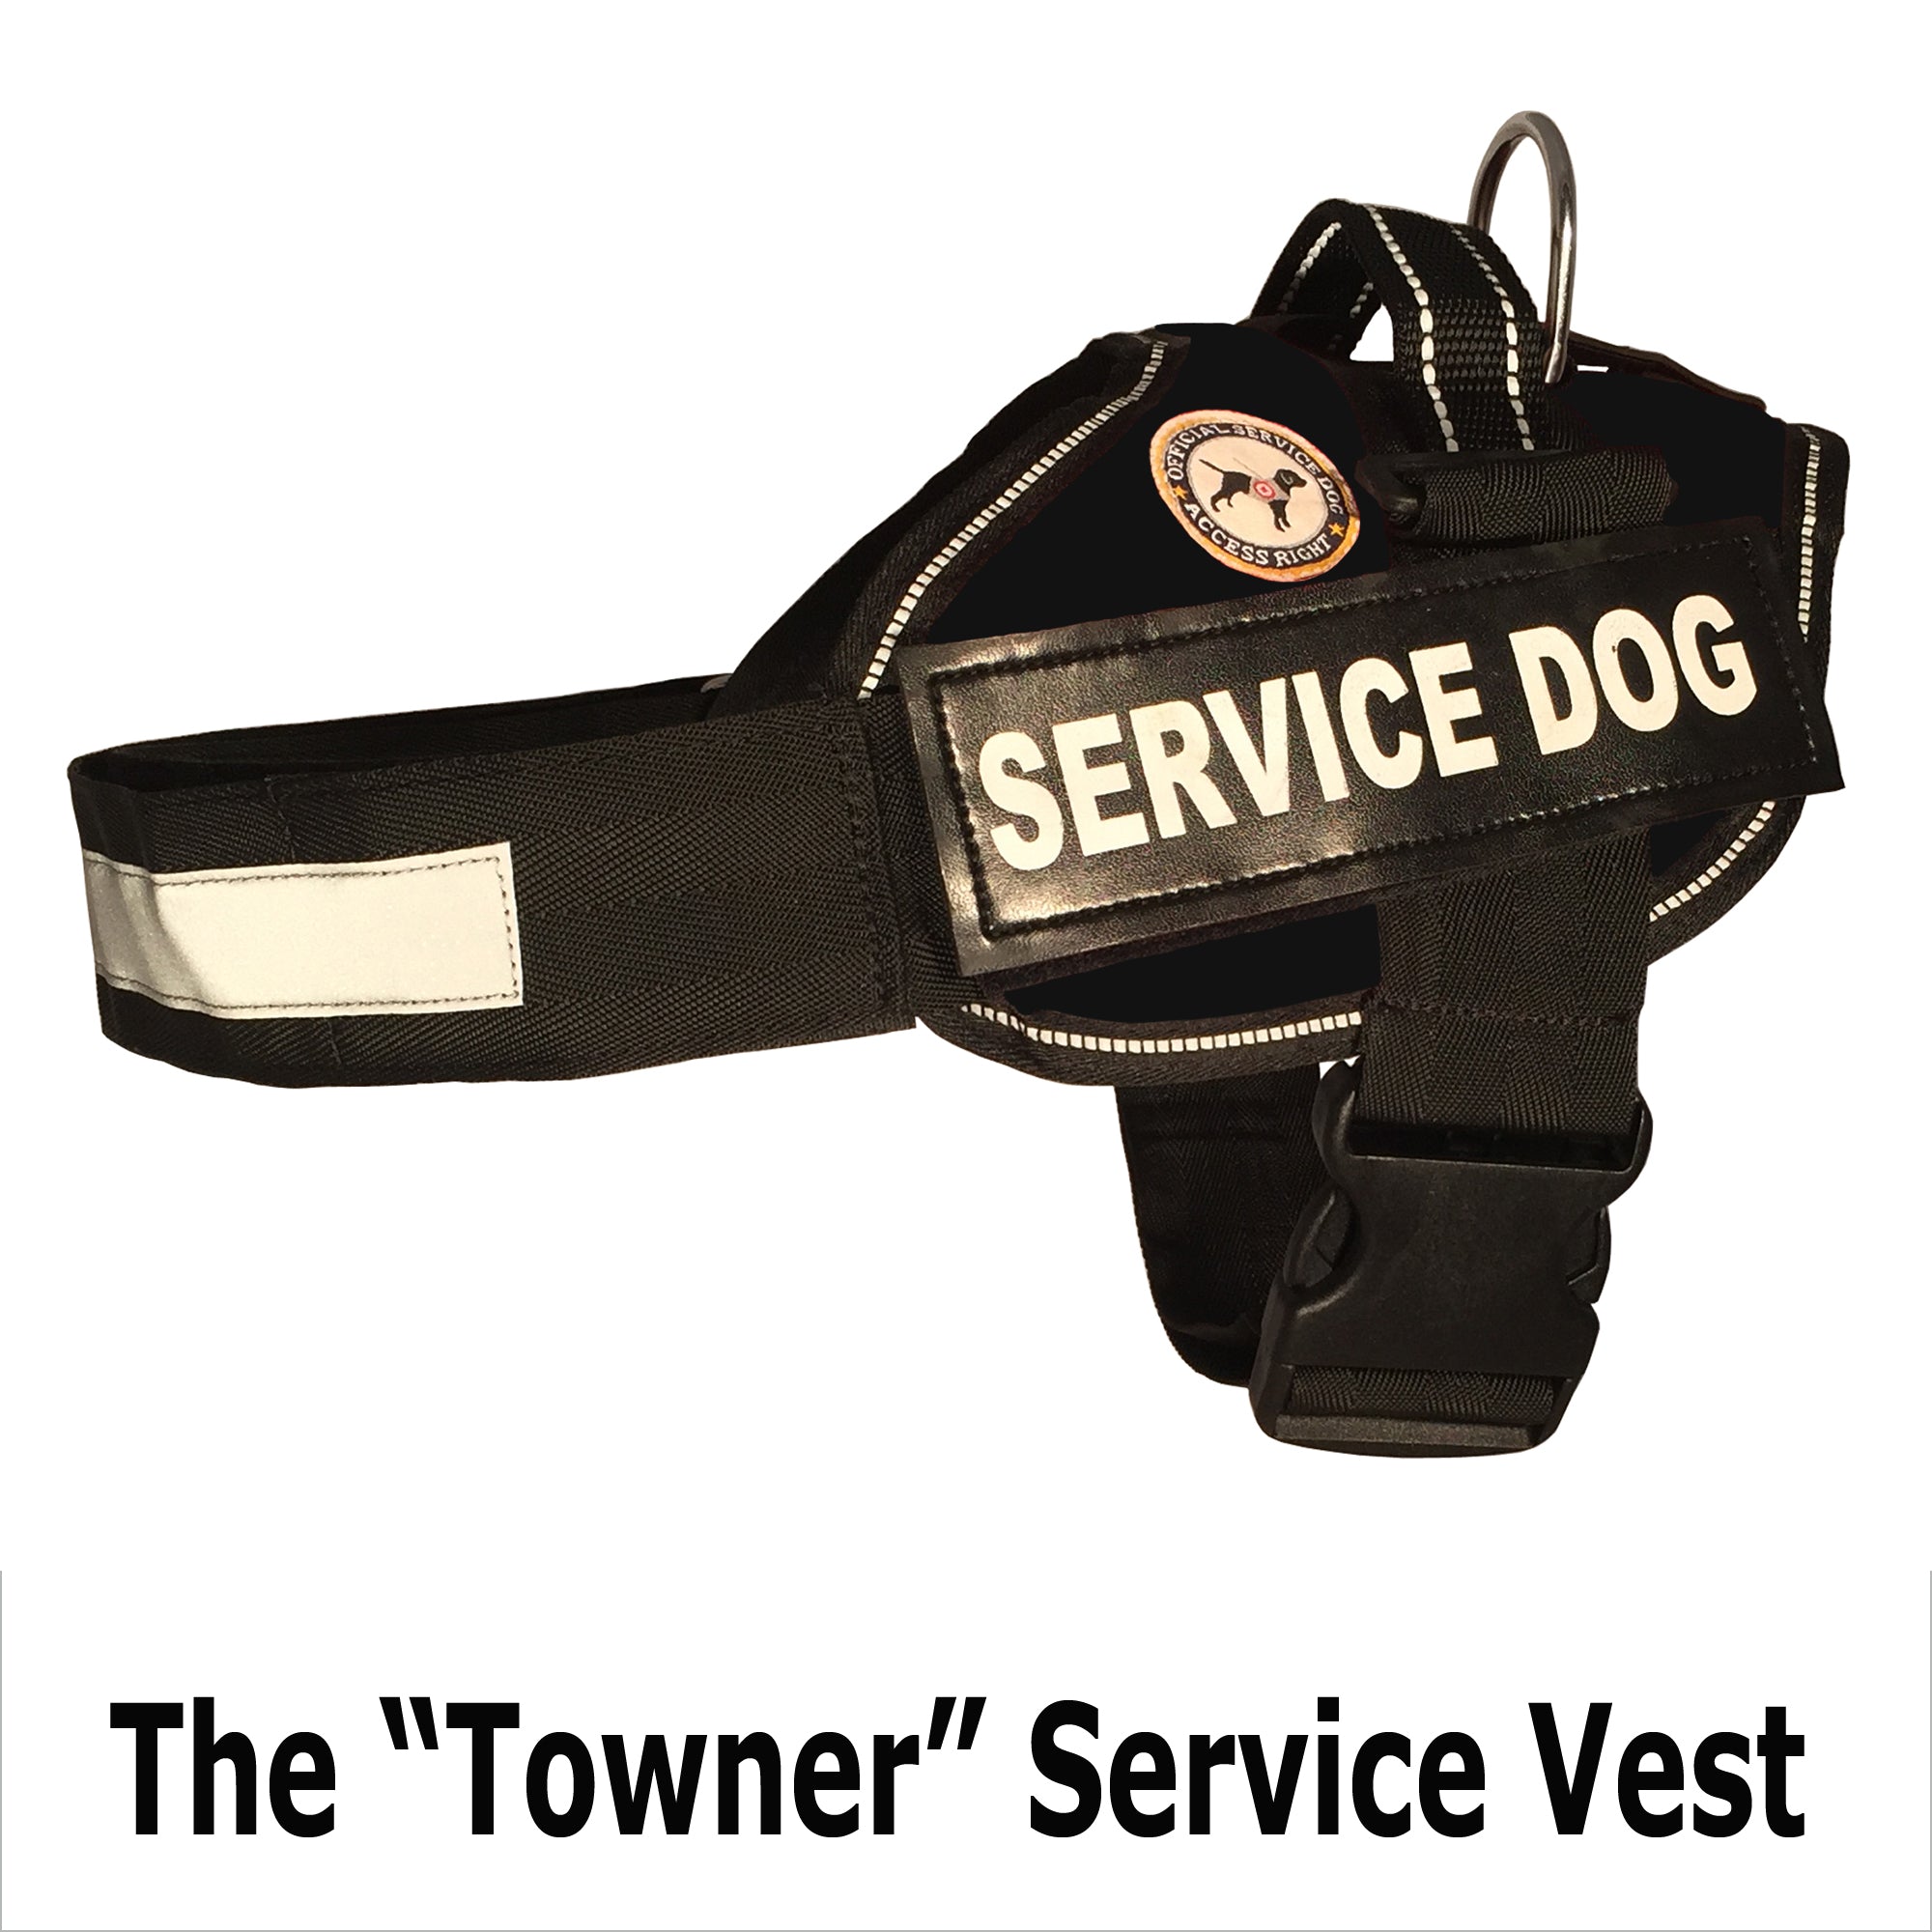 Service Dog Vest + ID Tag + 50 ADA Information Cards - Service Dog Harness  w Patch in Sizes X Small to XX Large, Metal Dog Tag has Durable Clip